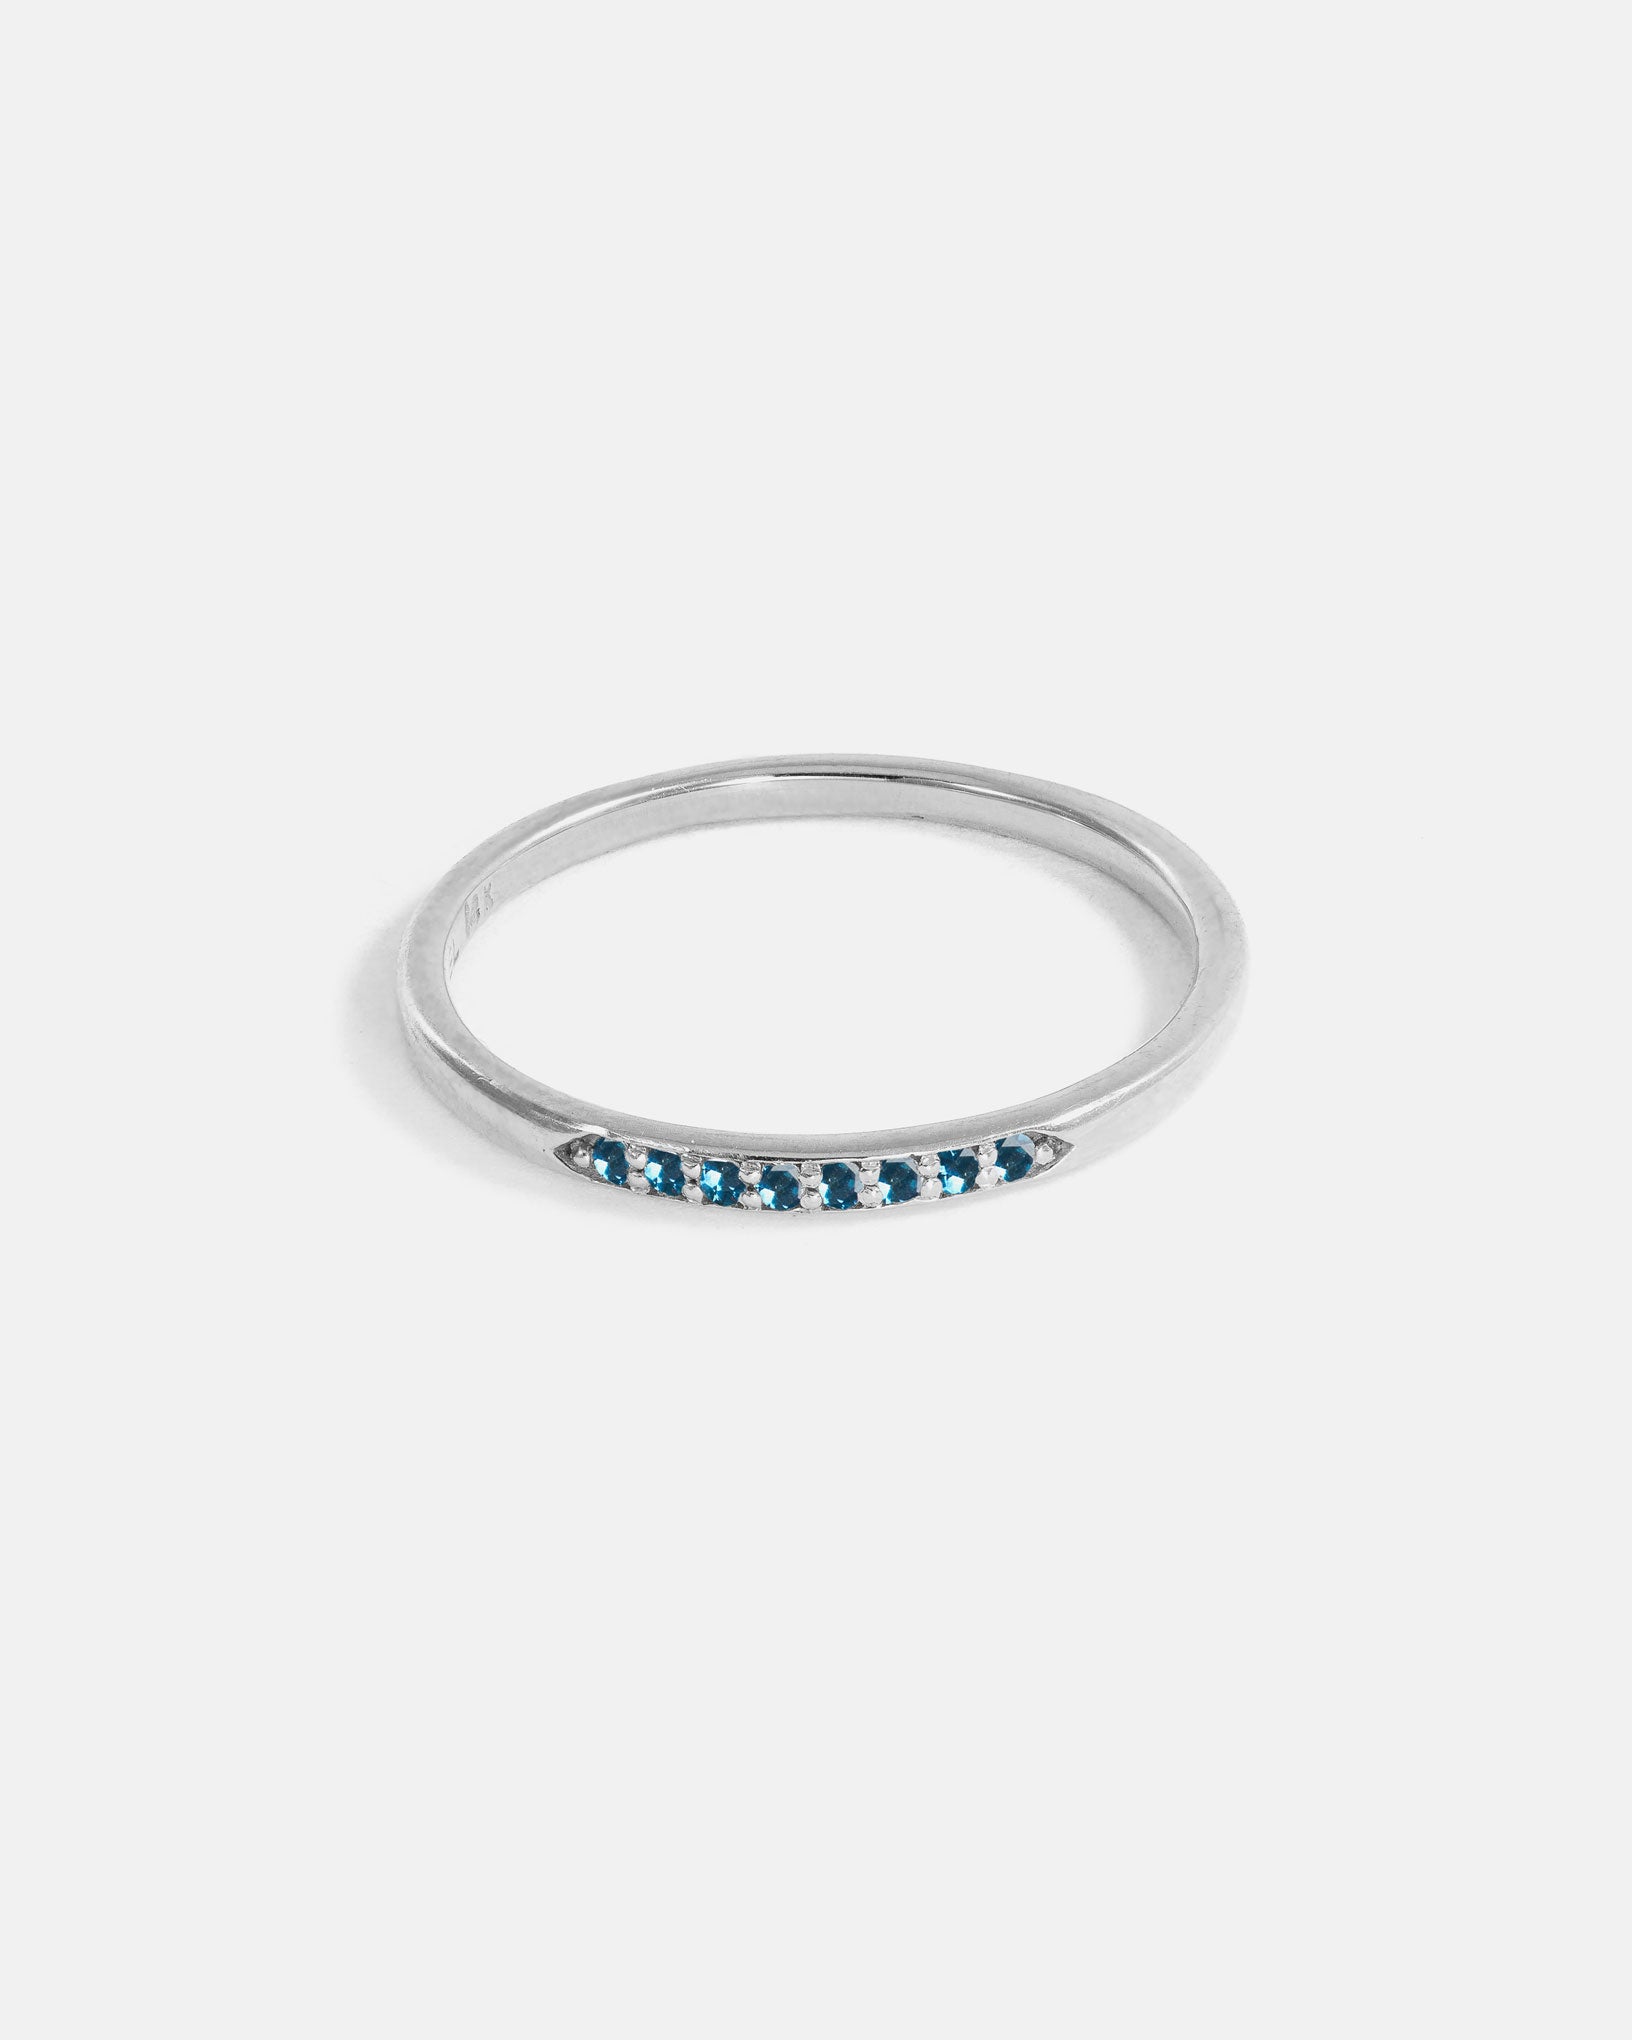 Stratura Wedding Ring in 14k White Gold with Ethical Birthstones